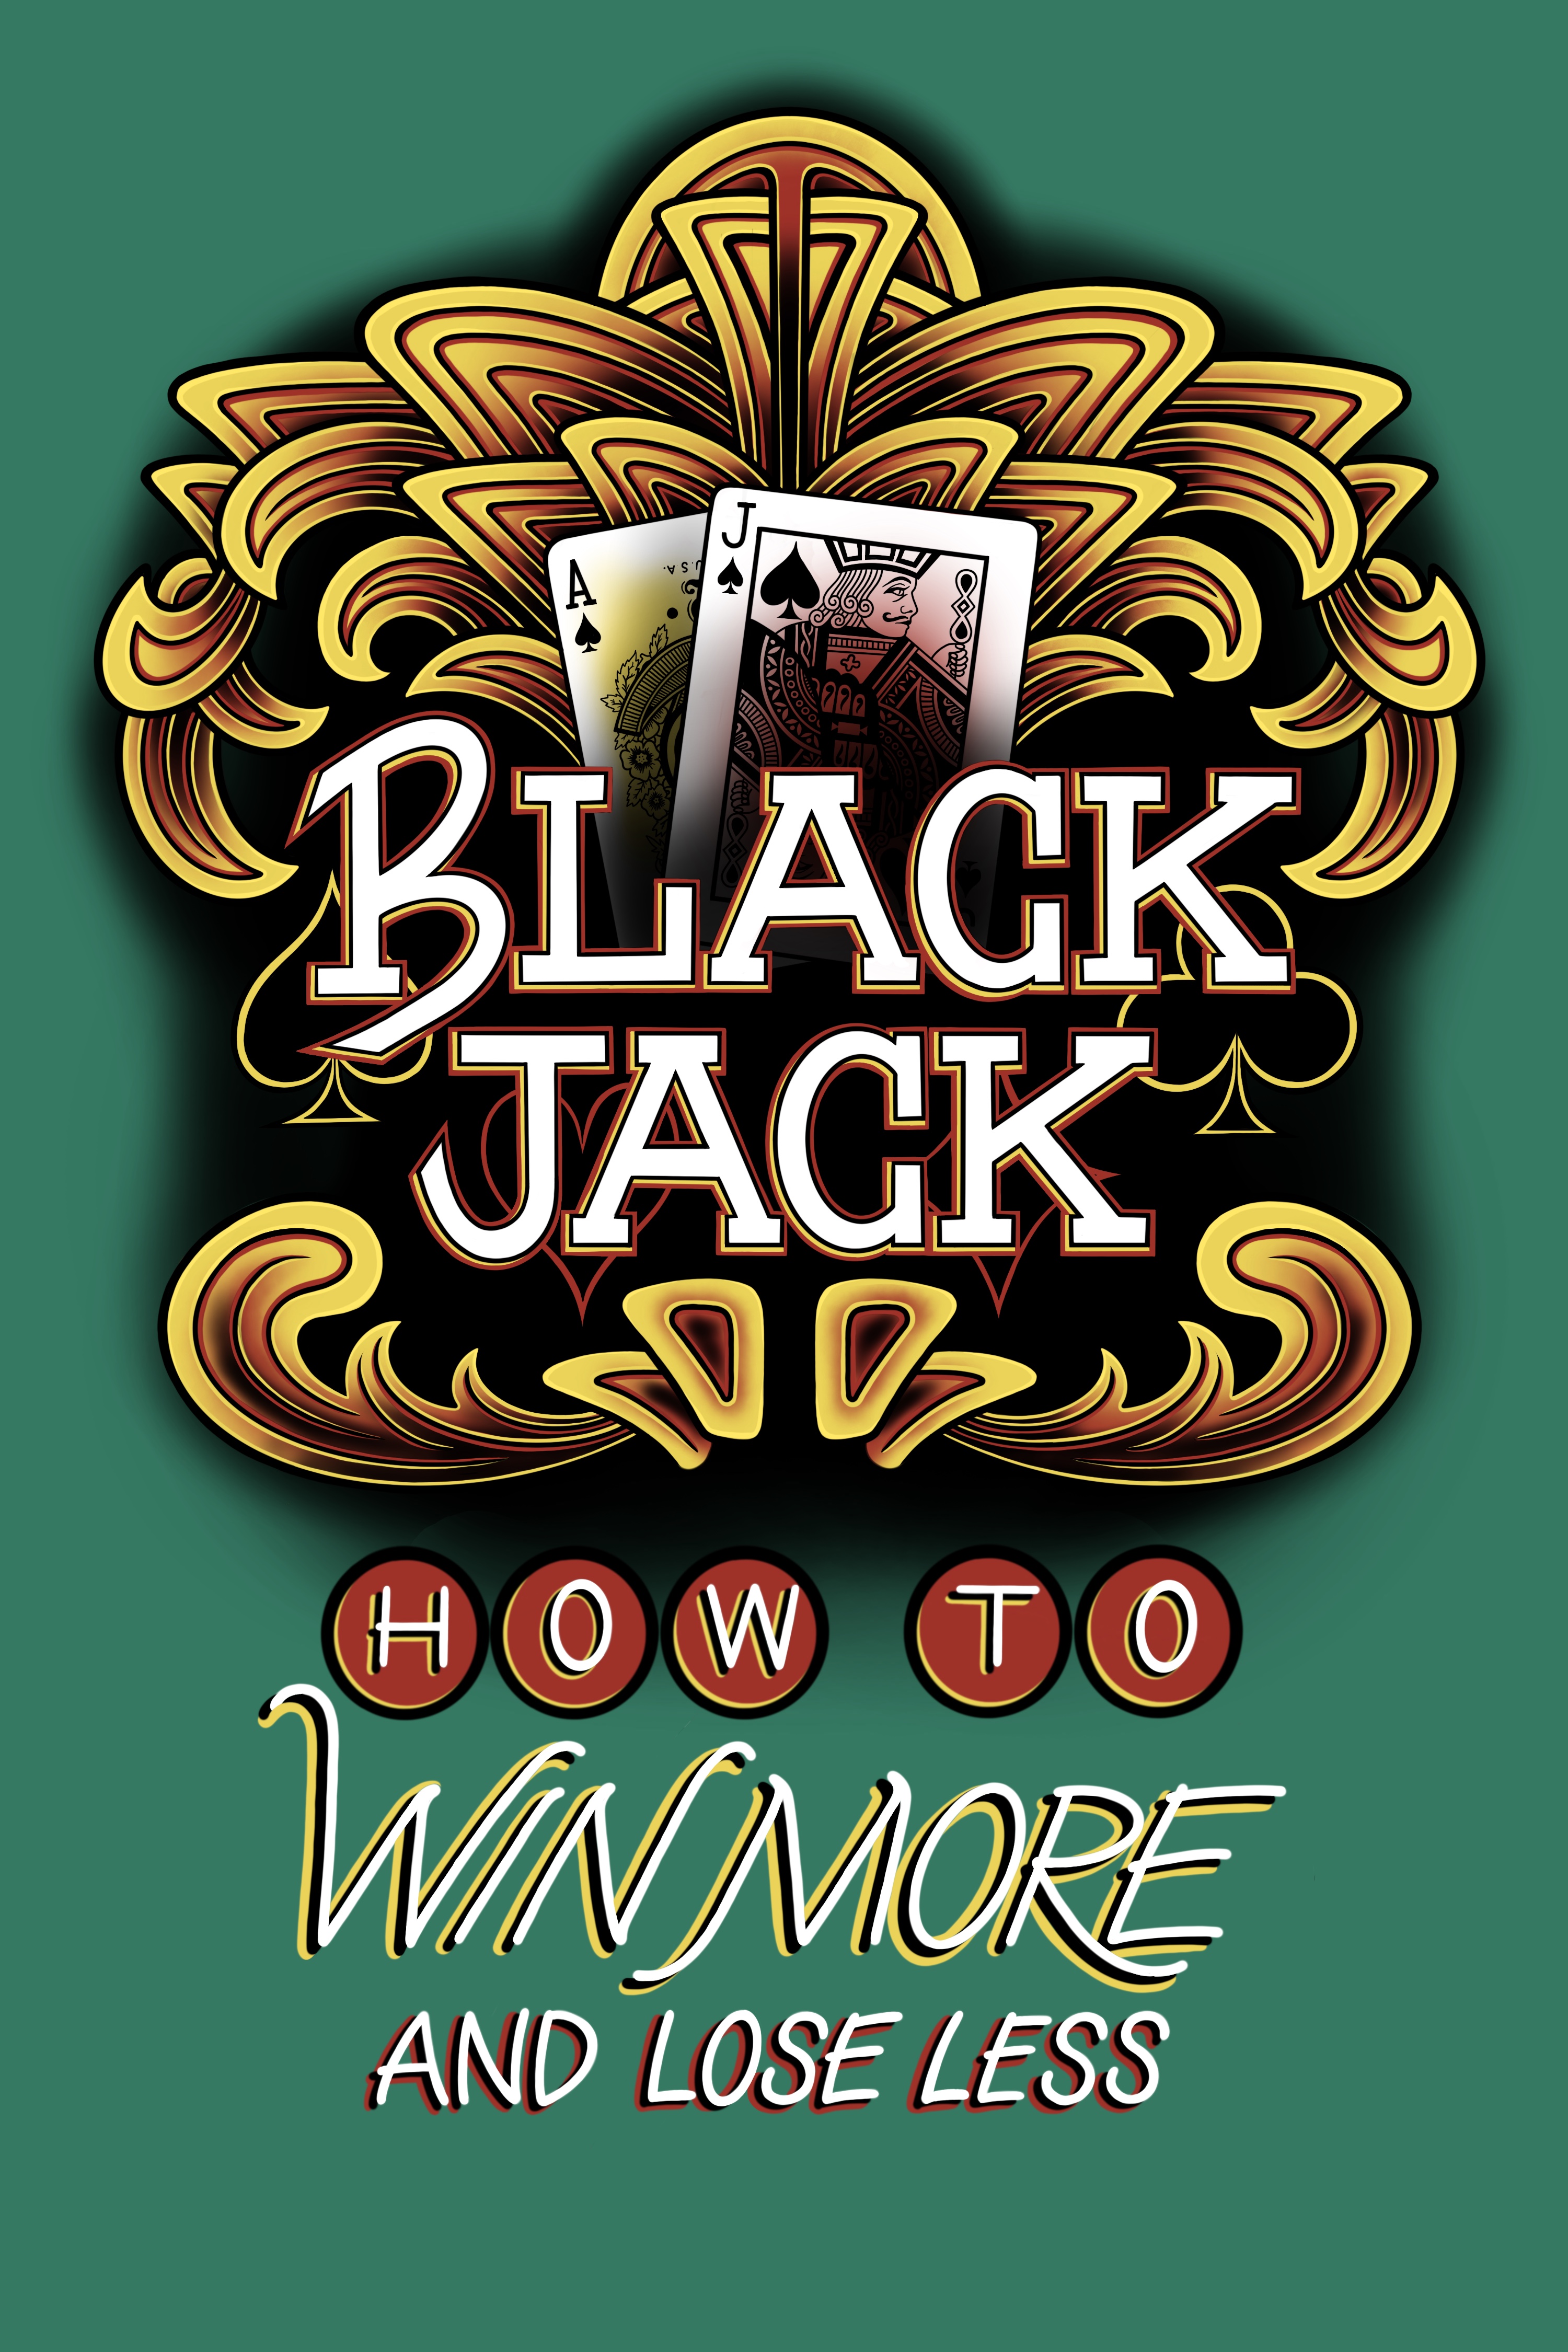 Black Jack - How to Win More and Lose Less by Johnny Lee _Spotlight Publishing House